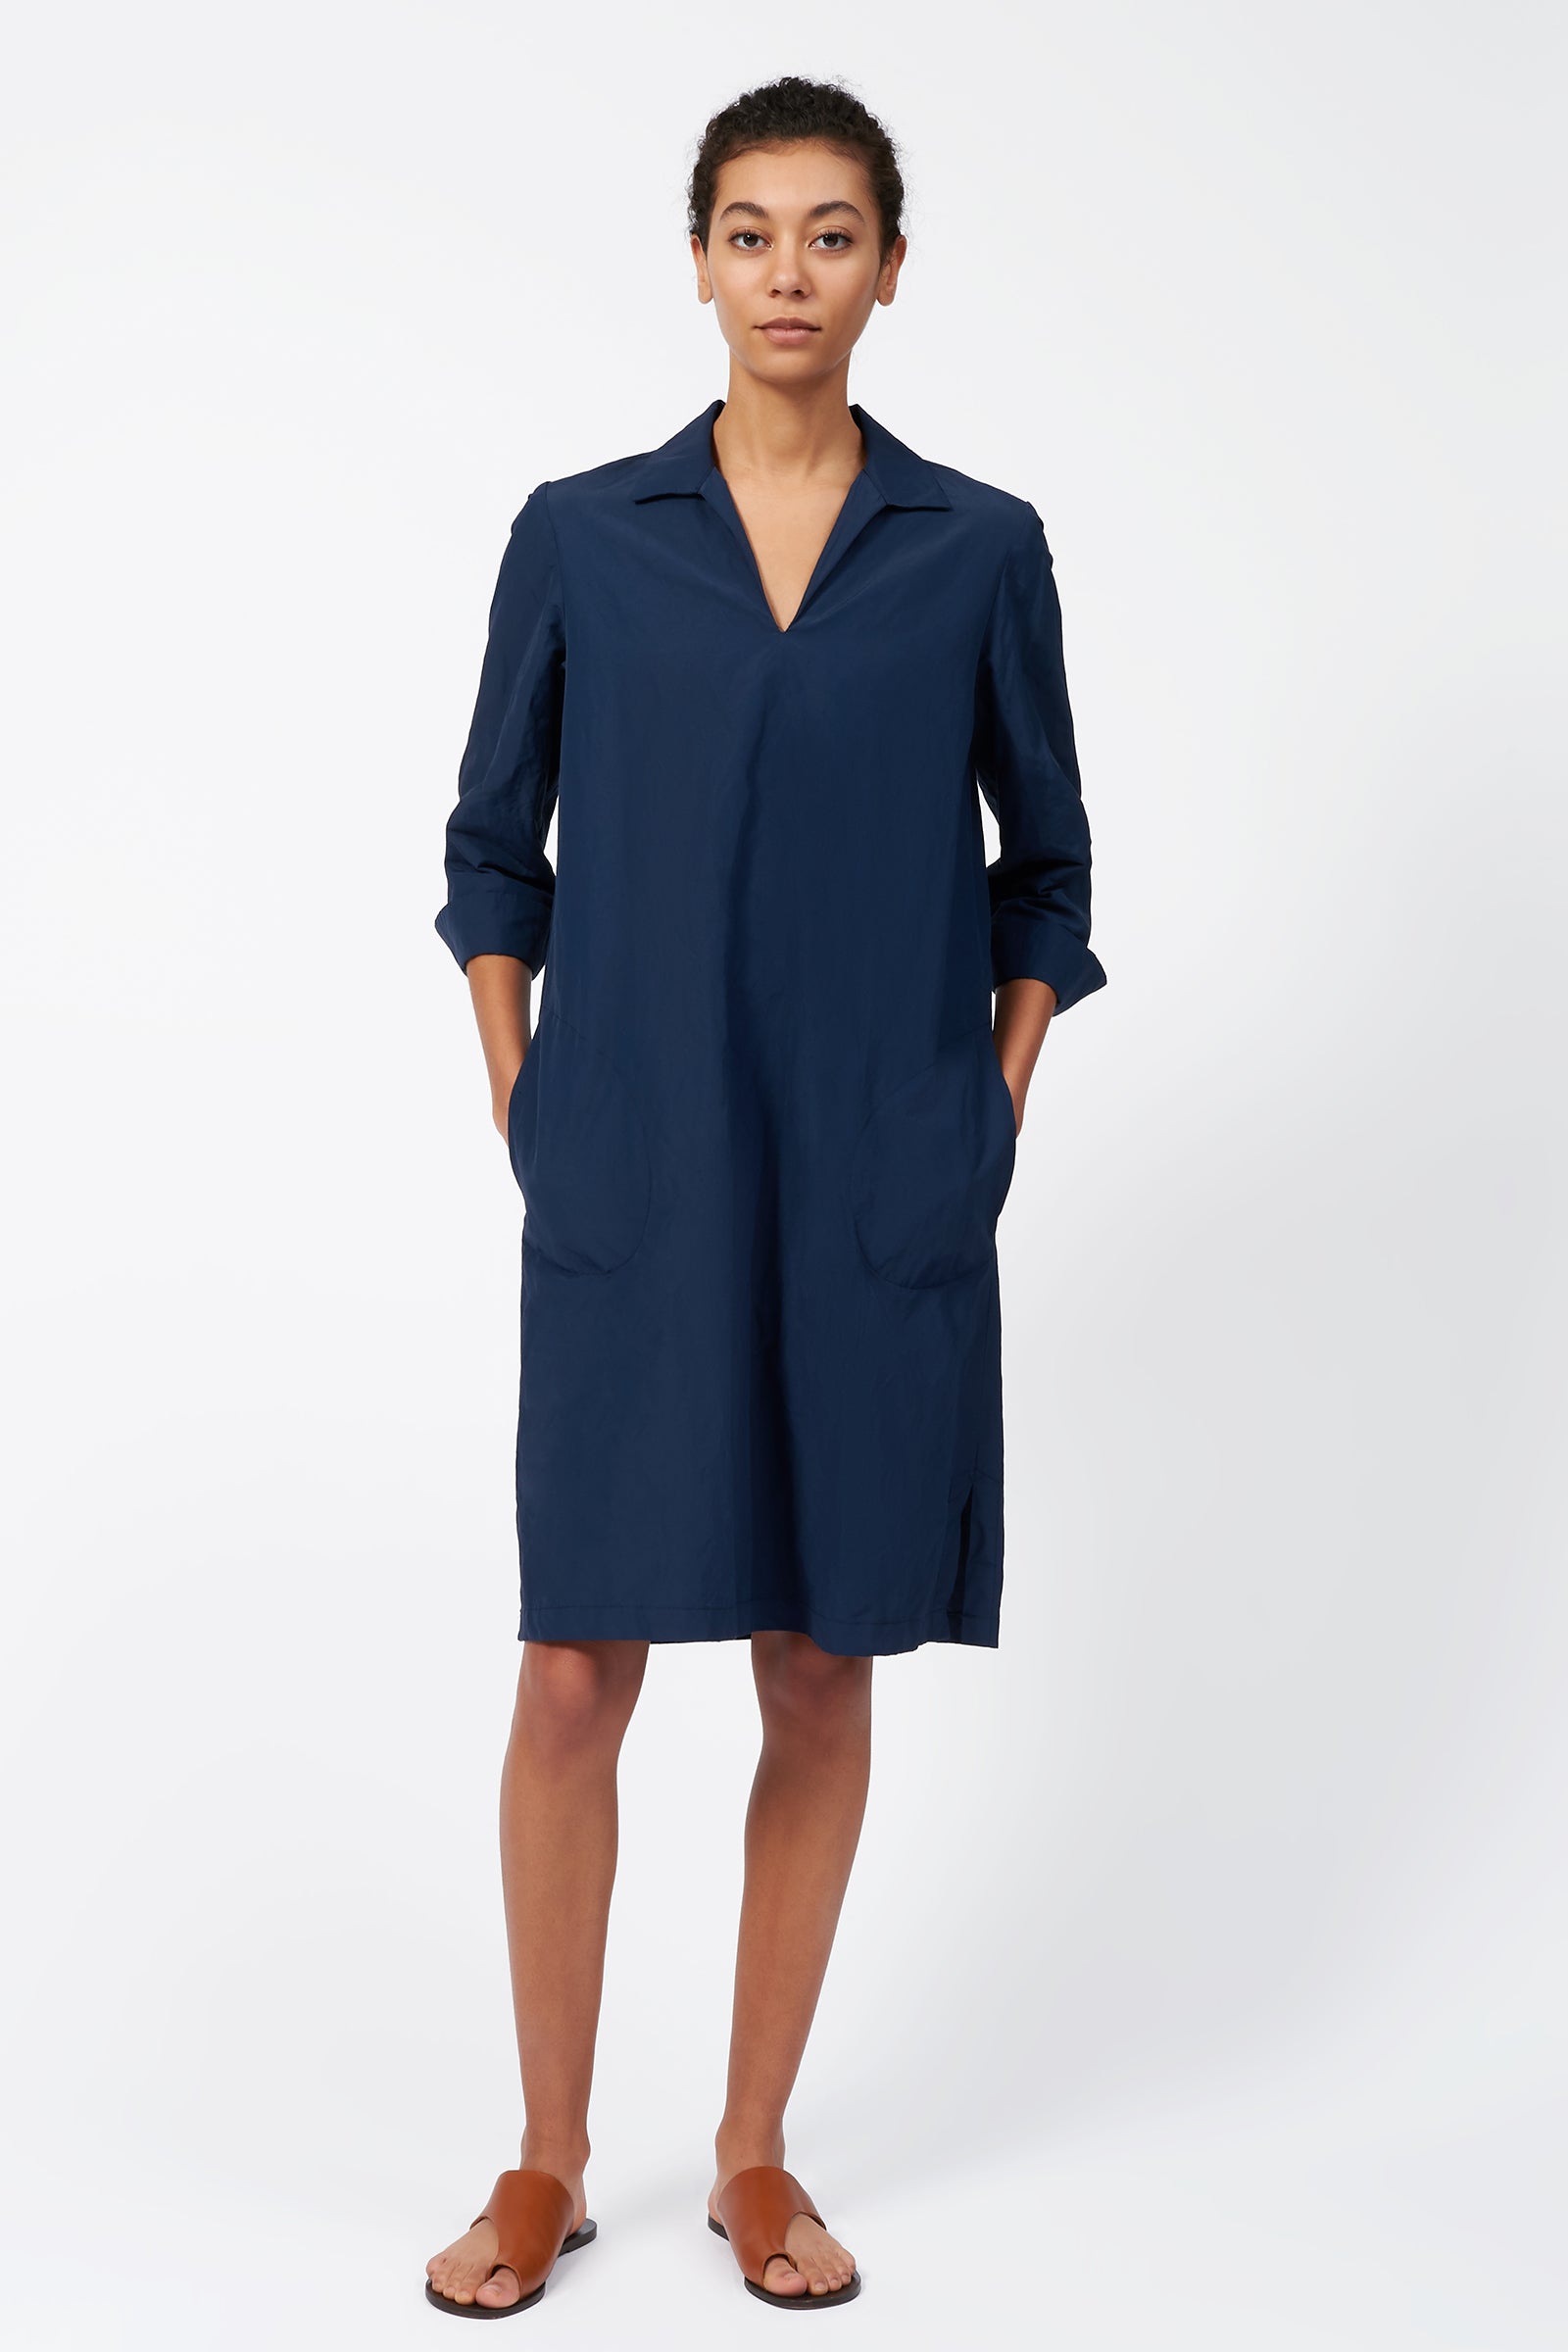 Collared V Neck Dress in Navy Made From Cotton Nylon – KAL RIEMAN